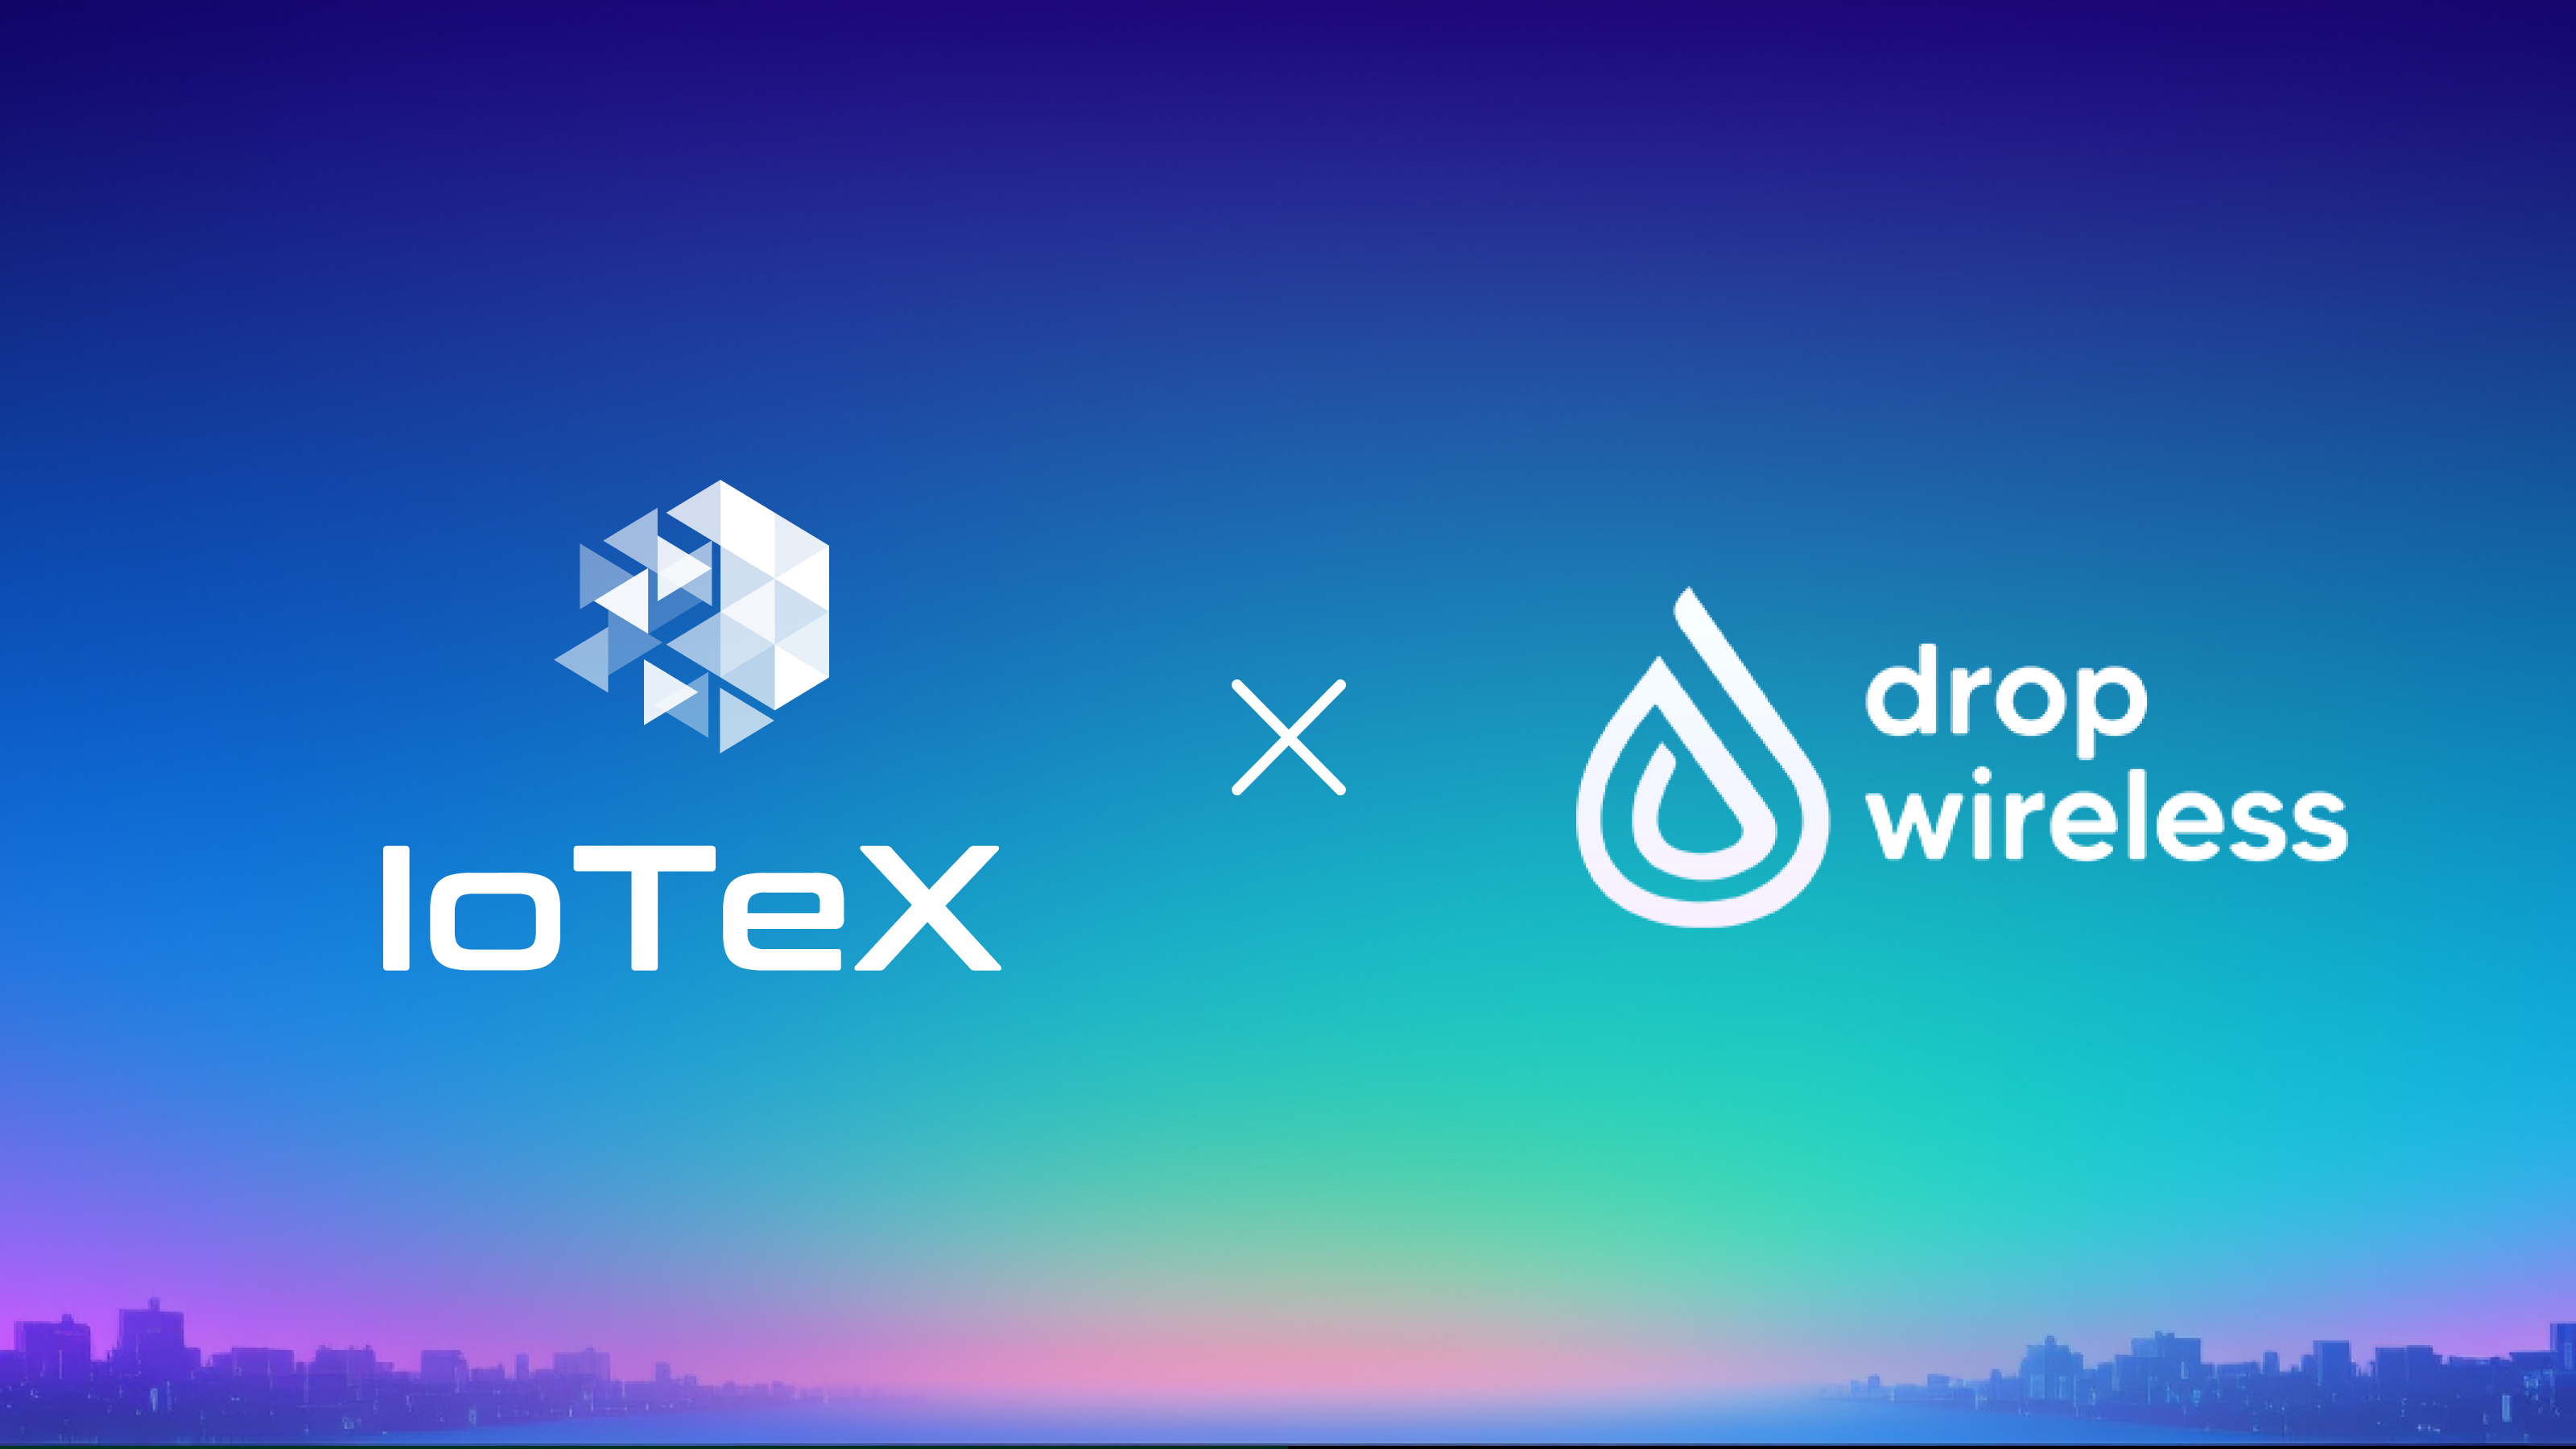 Drop Wireless Moves to IoTeX: A DePIN Evolution Story